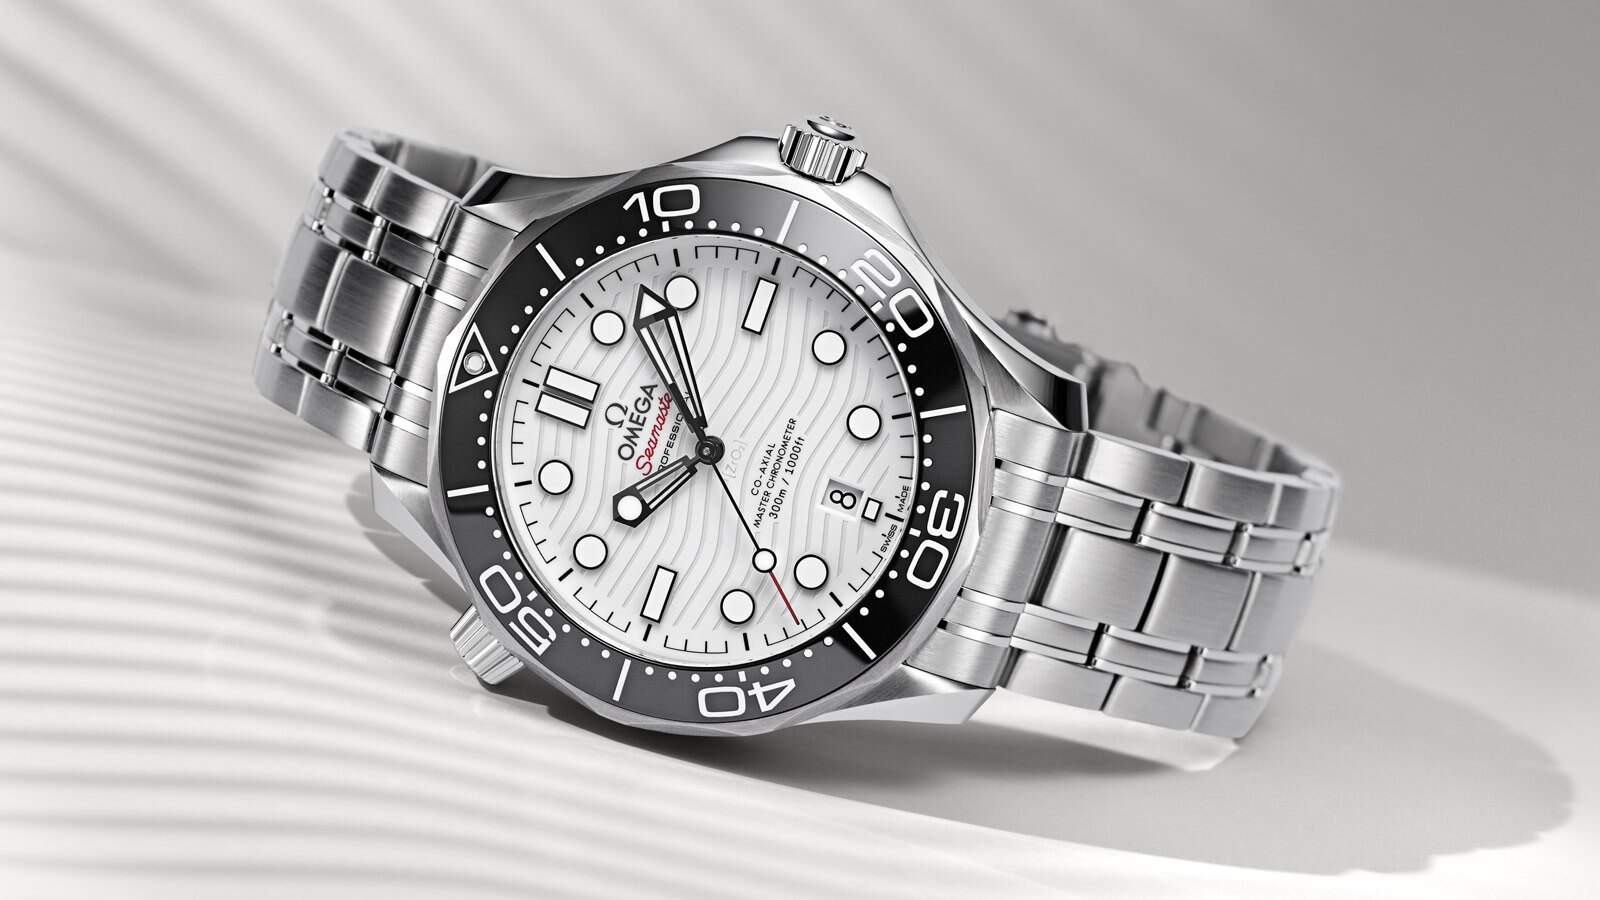 The Seamaster Diver 300 M is best choice for people who are interested in diving watches.